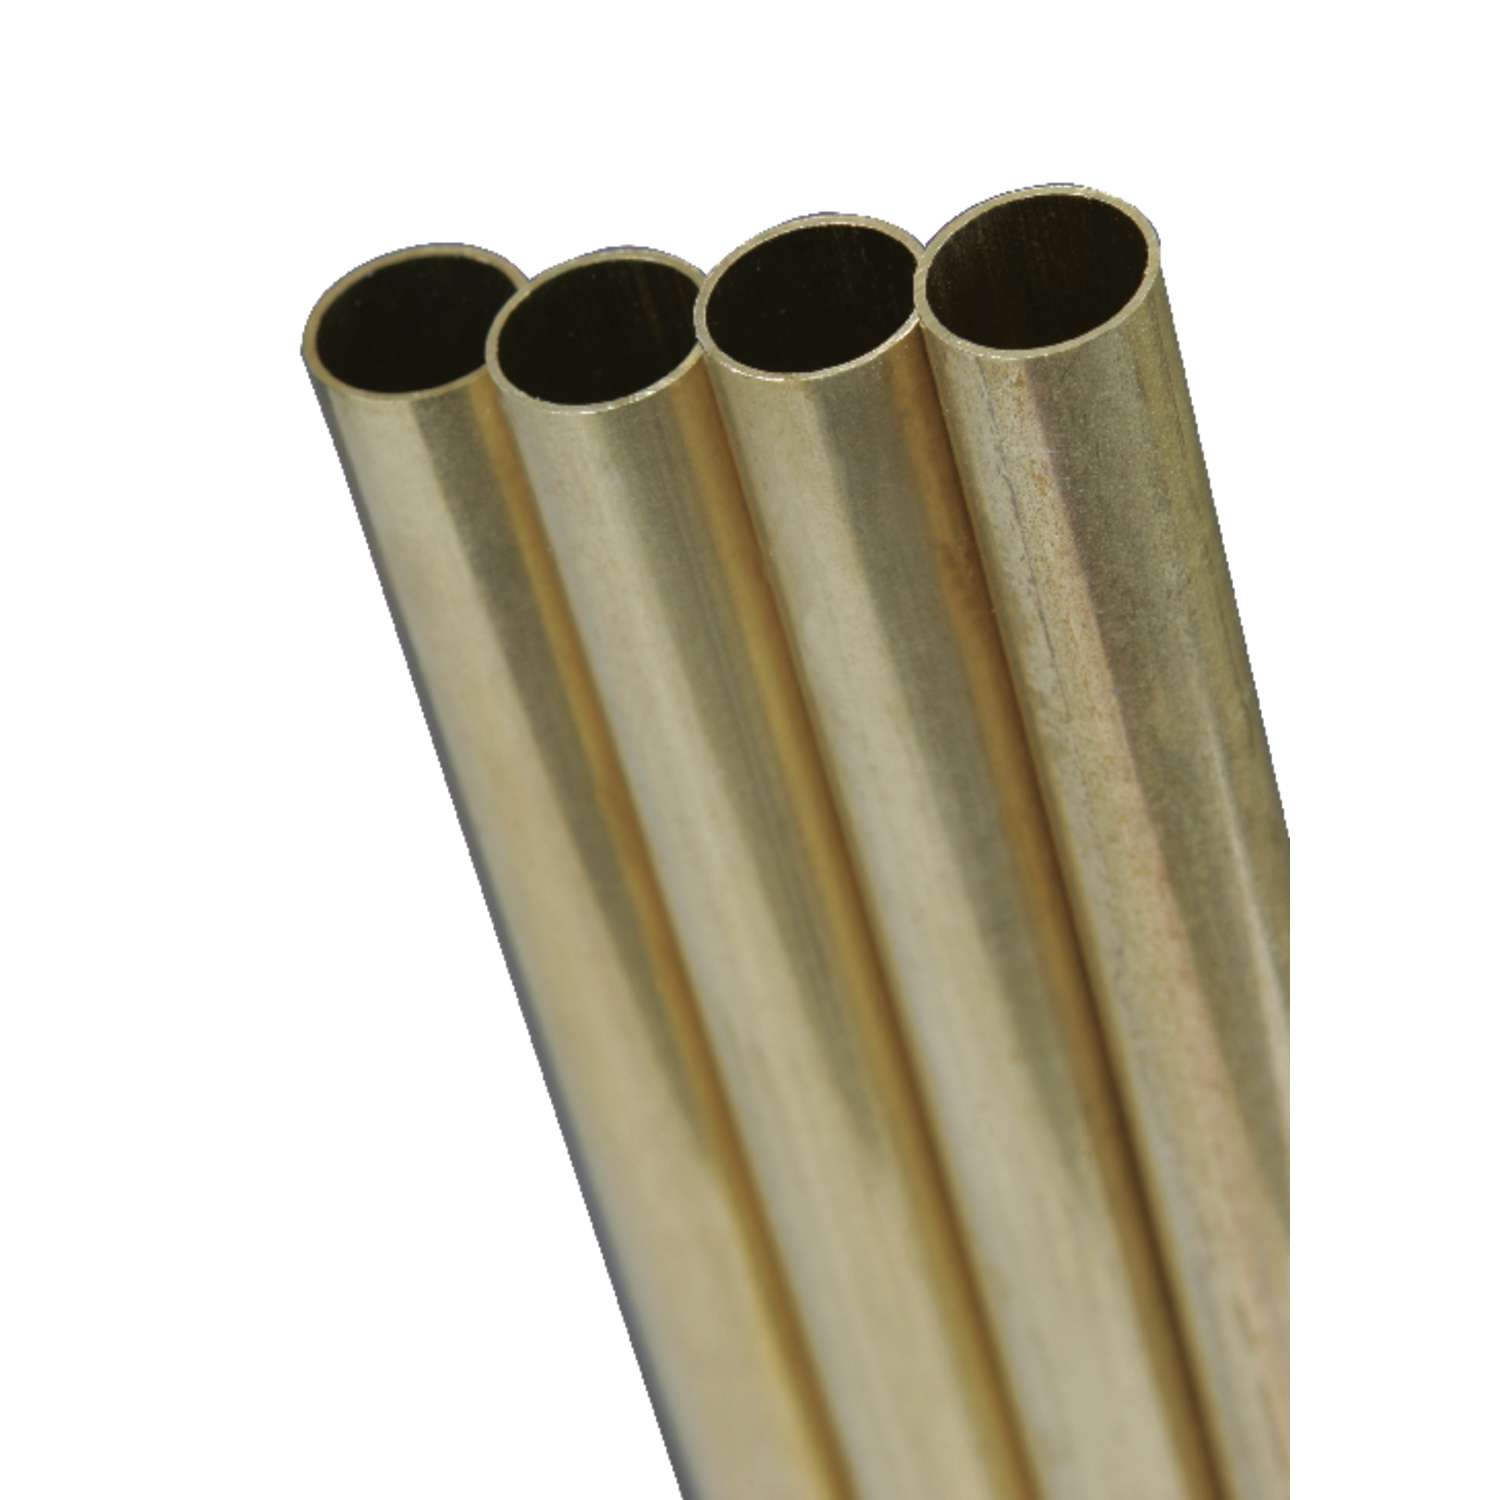 Details about   260 Brass Tube 1 3/4" OD x .065" Wall x 1.62" ID x 3 Ft Length 